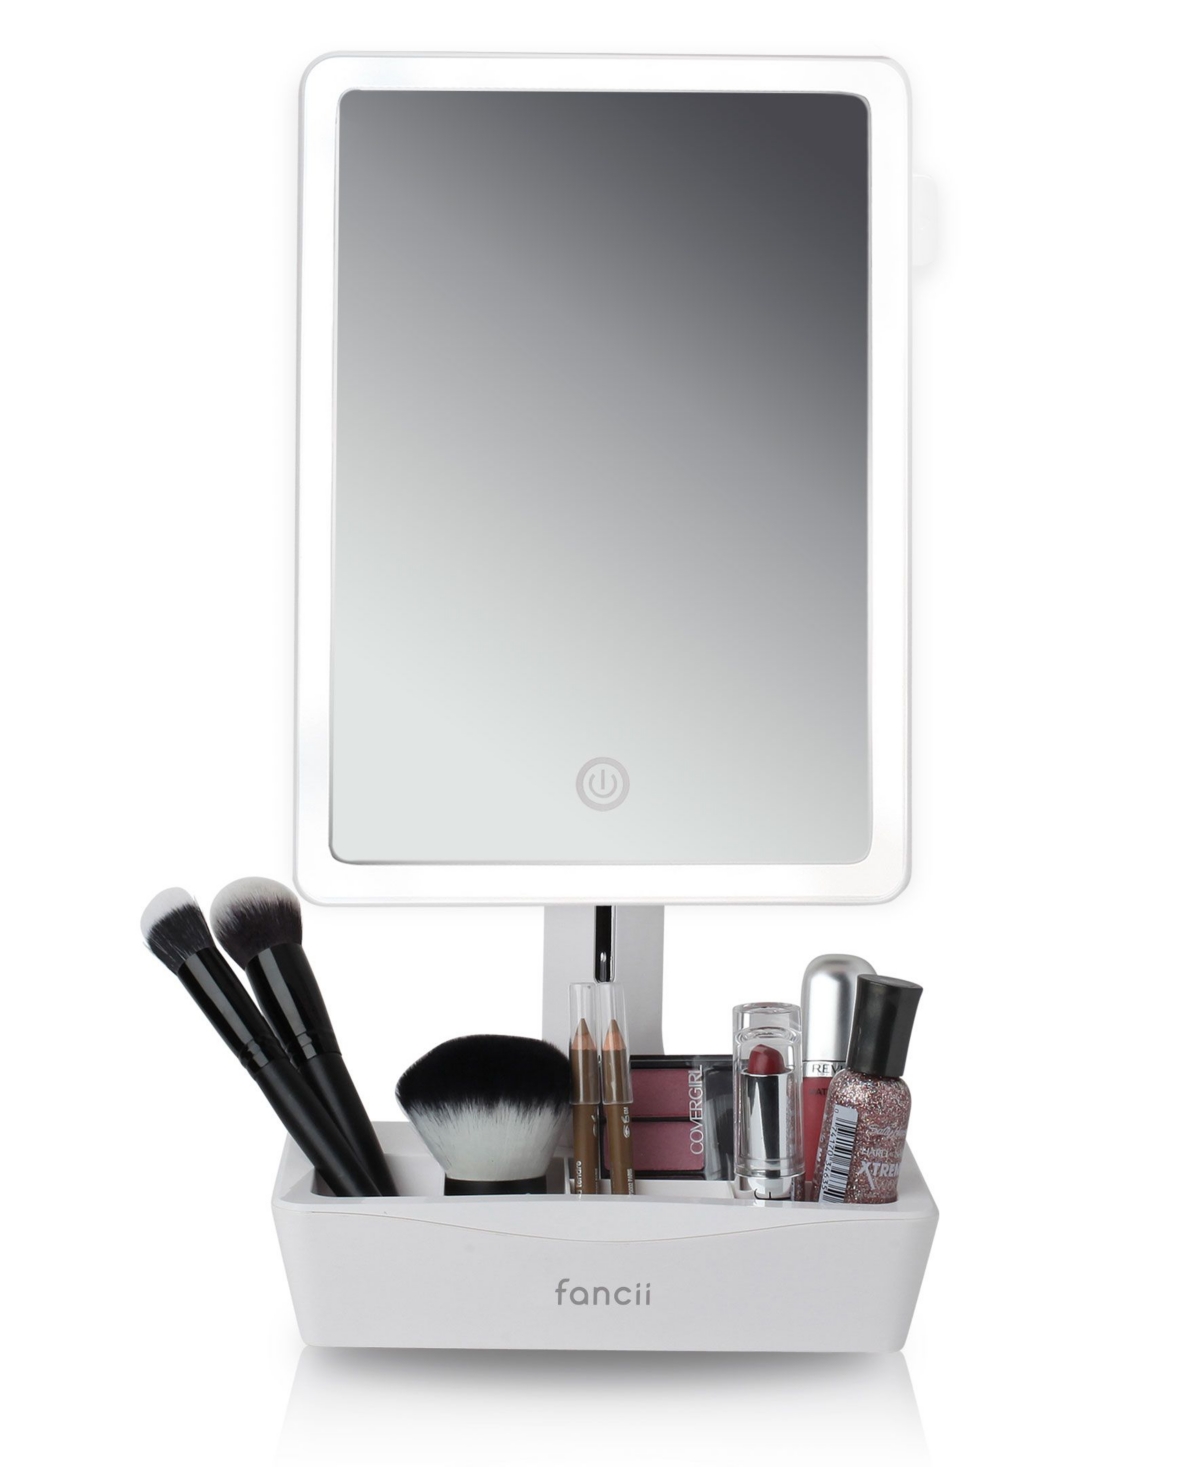 Gala Xl Led Lighted Vanity Mirror with Storage - White